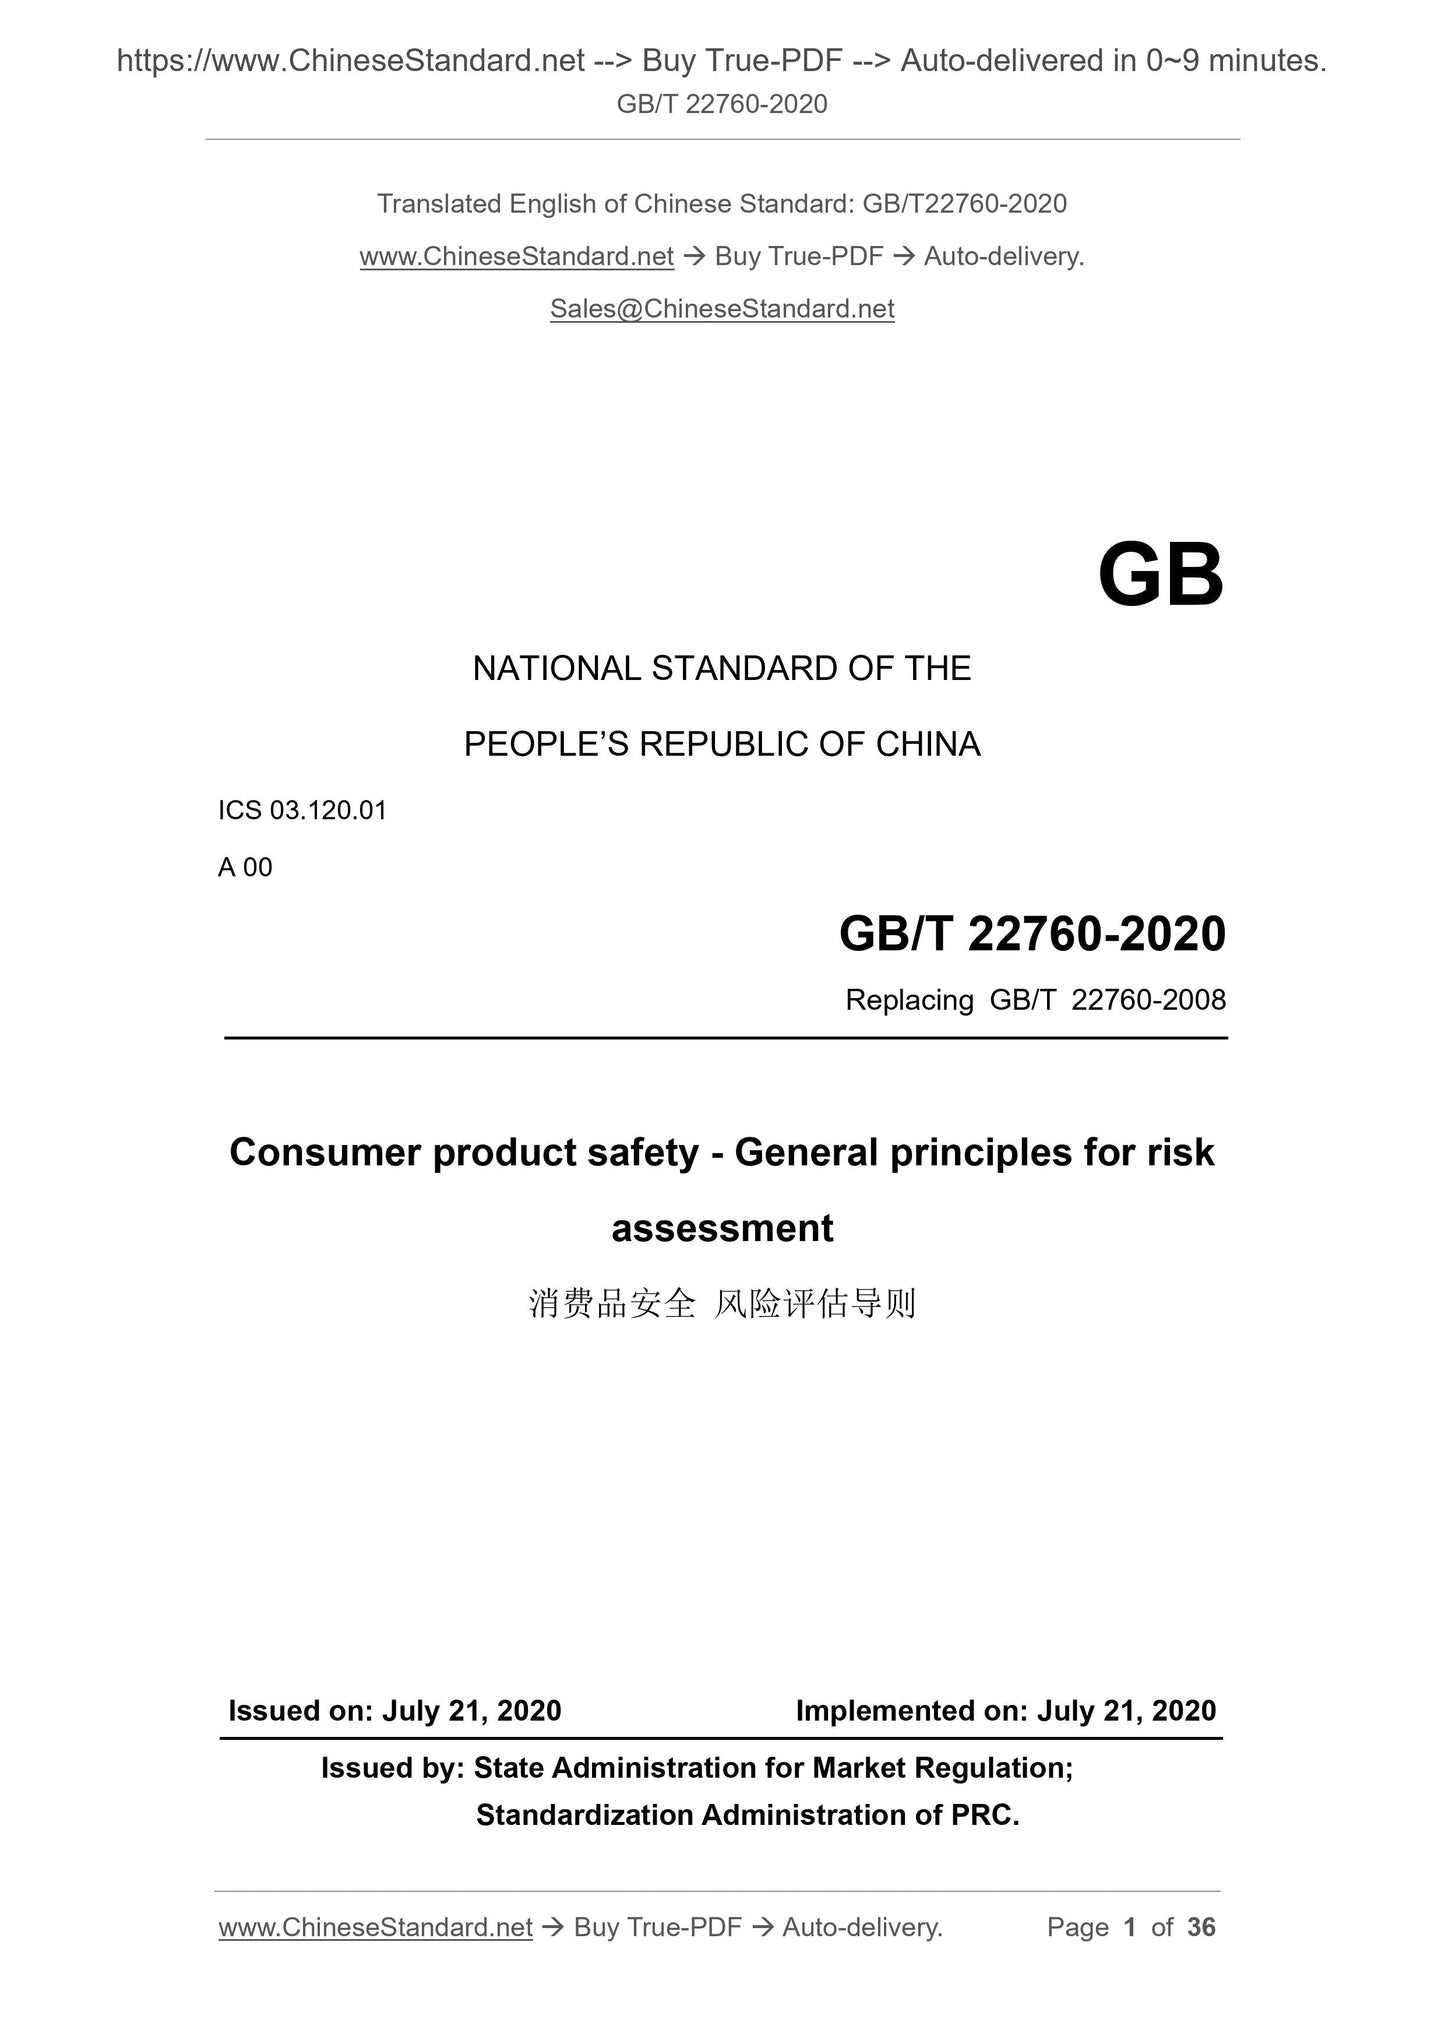 GB/T 22760-2020 Page 1